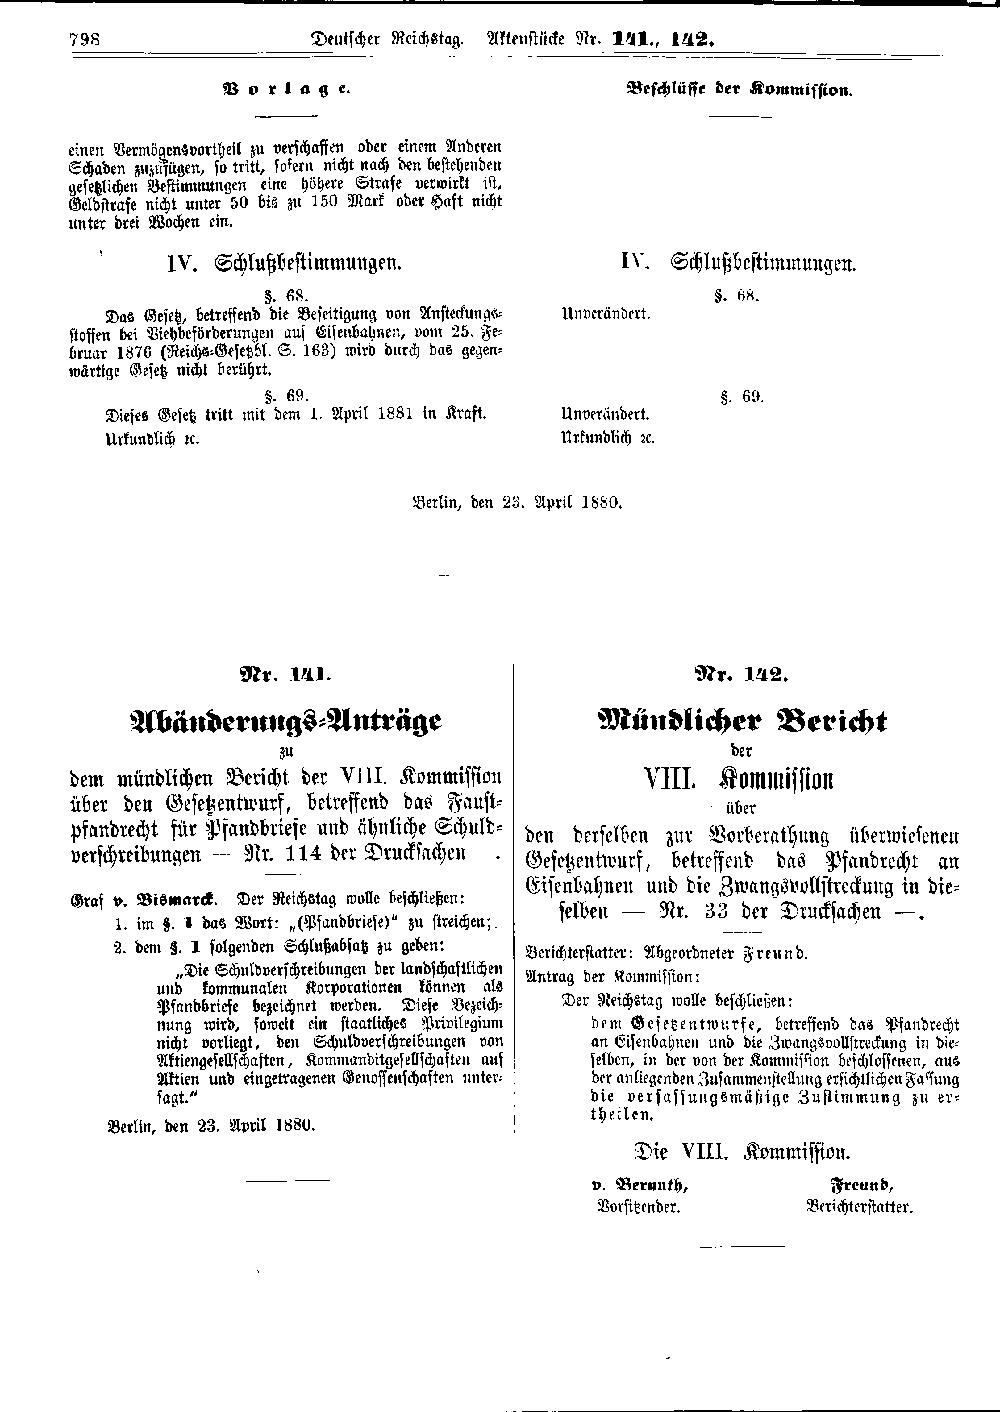 Scan of page 798